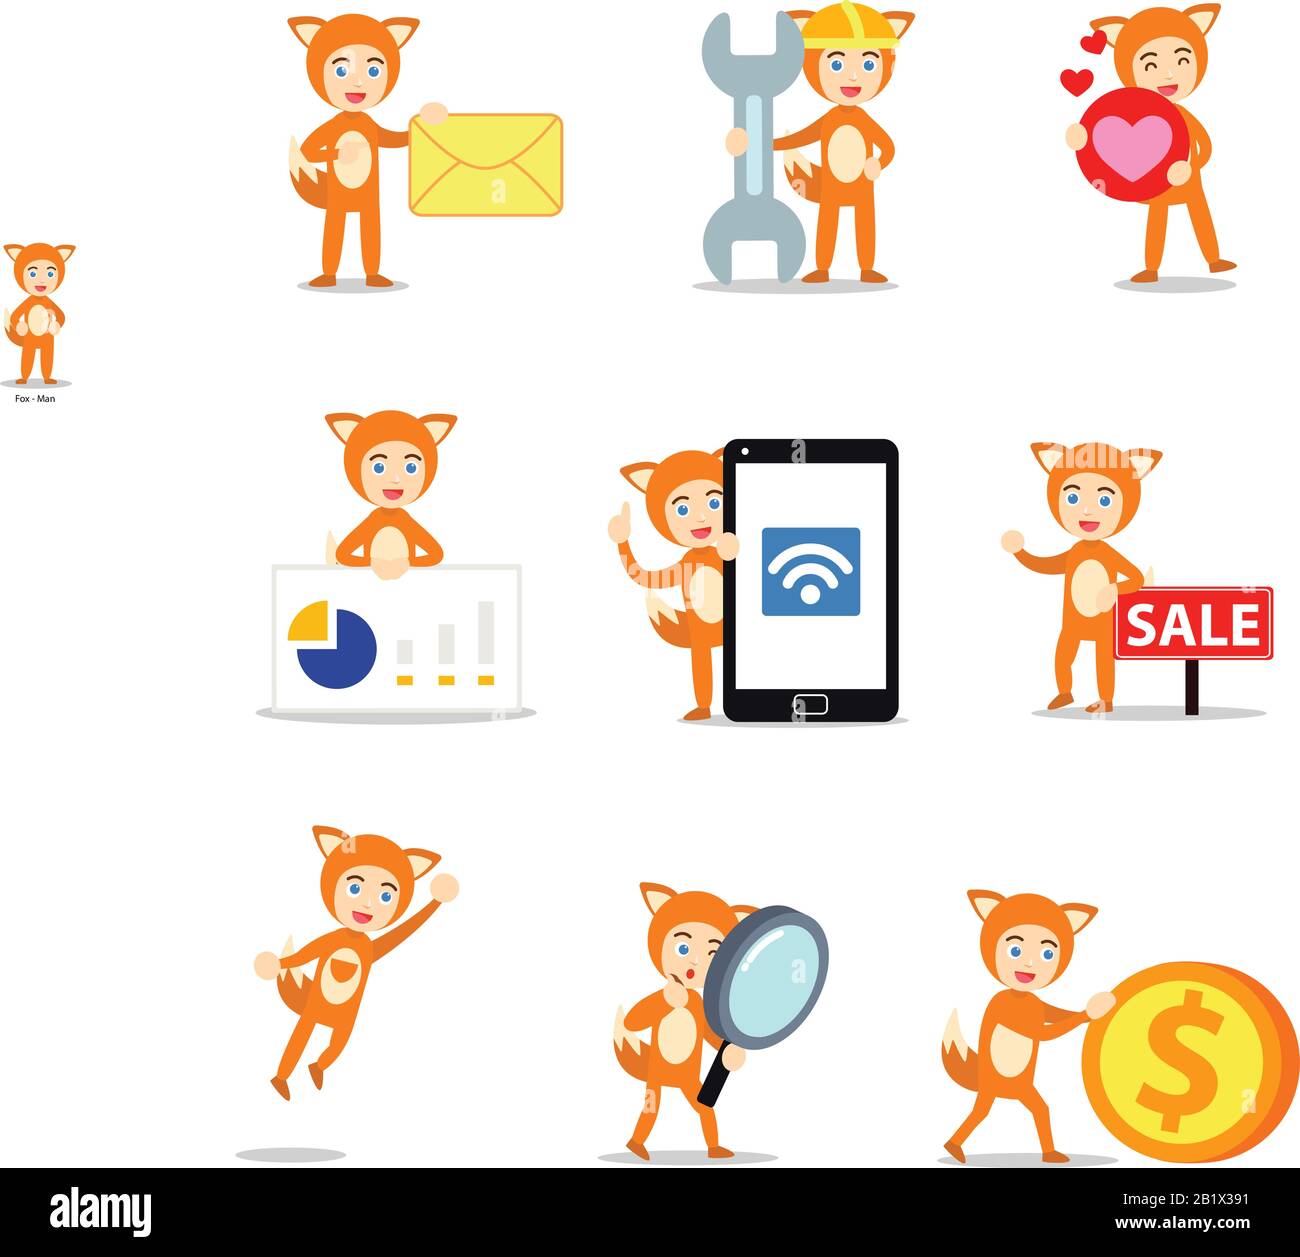 Set character of man in orange fox costume with tail. Stock Vector